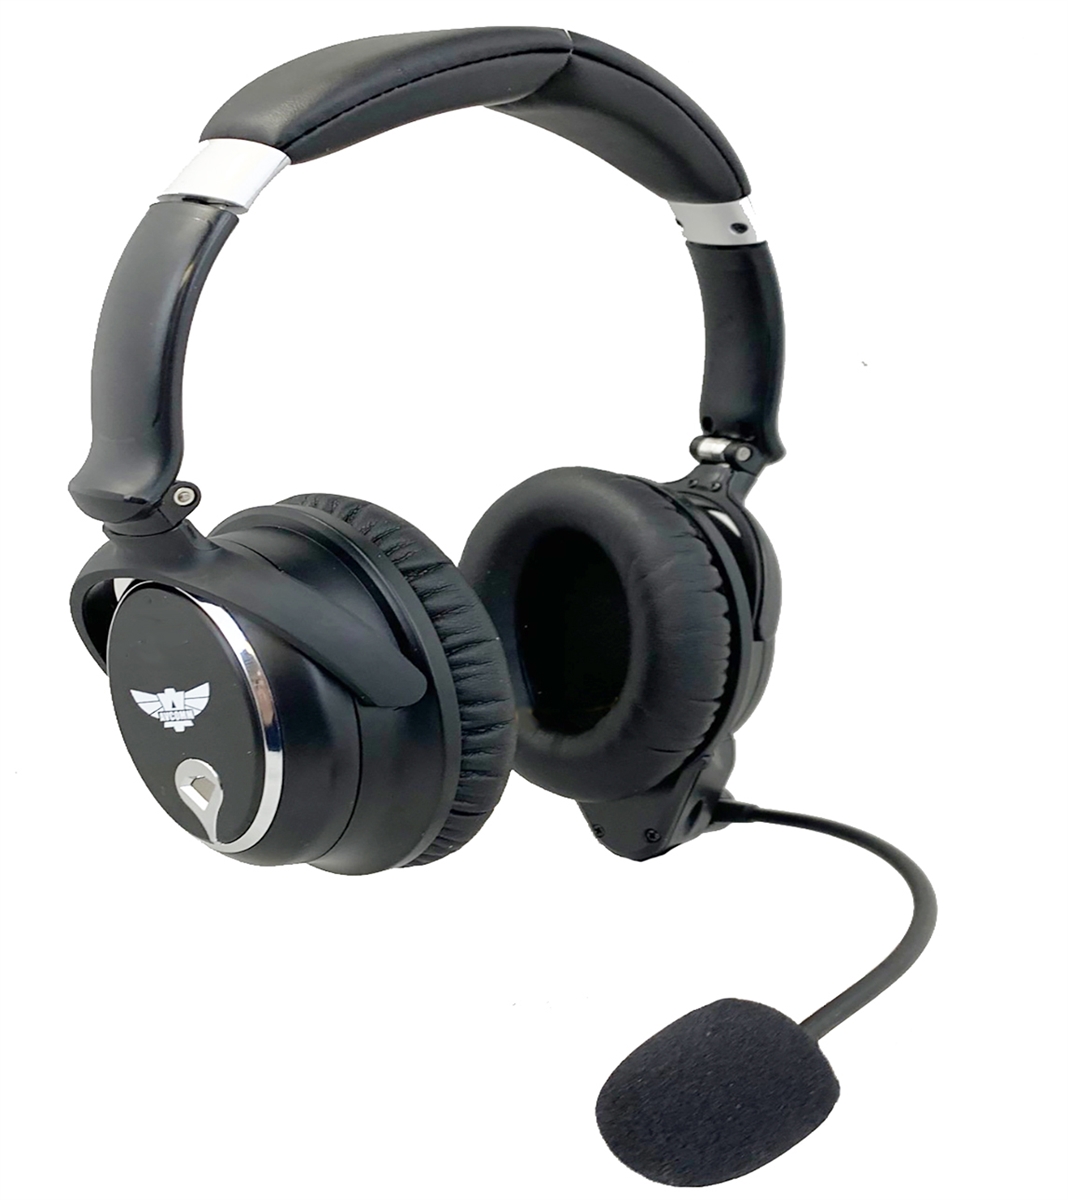 AC747 Universal Stereo Headset For Helicopter and Aviation